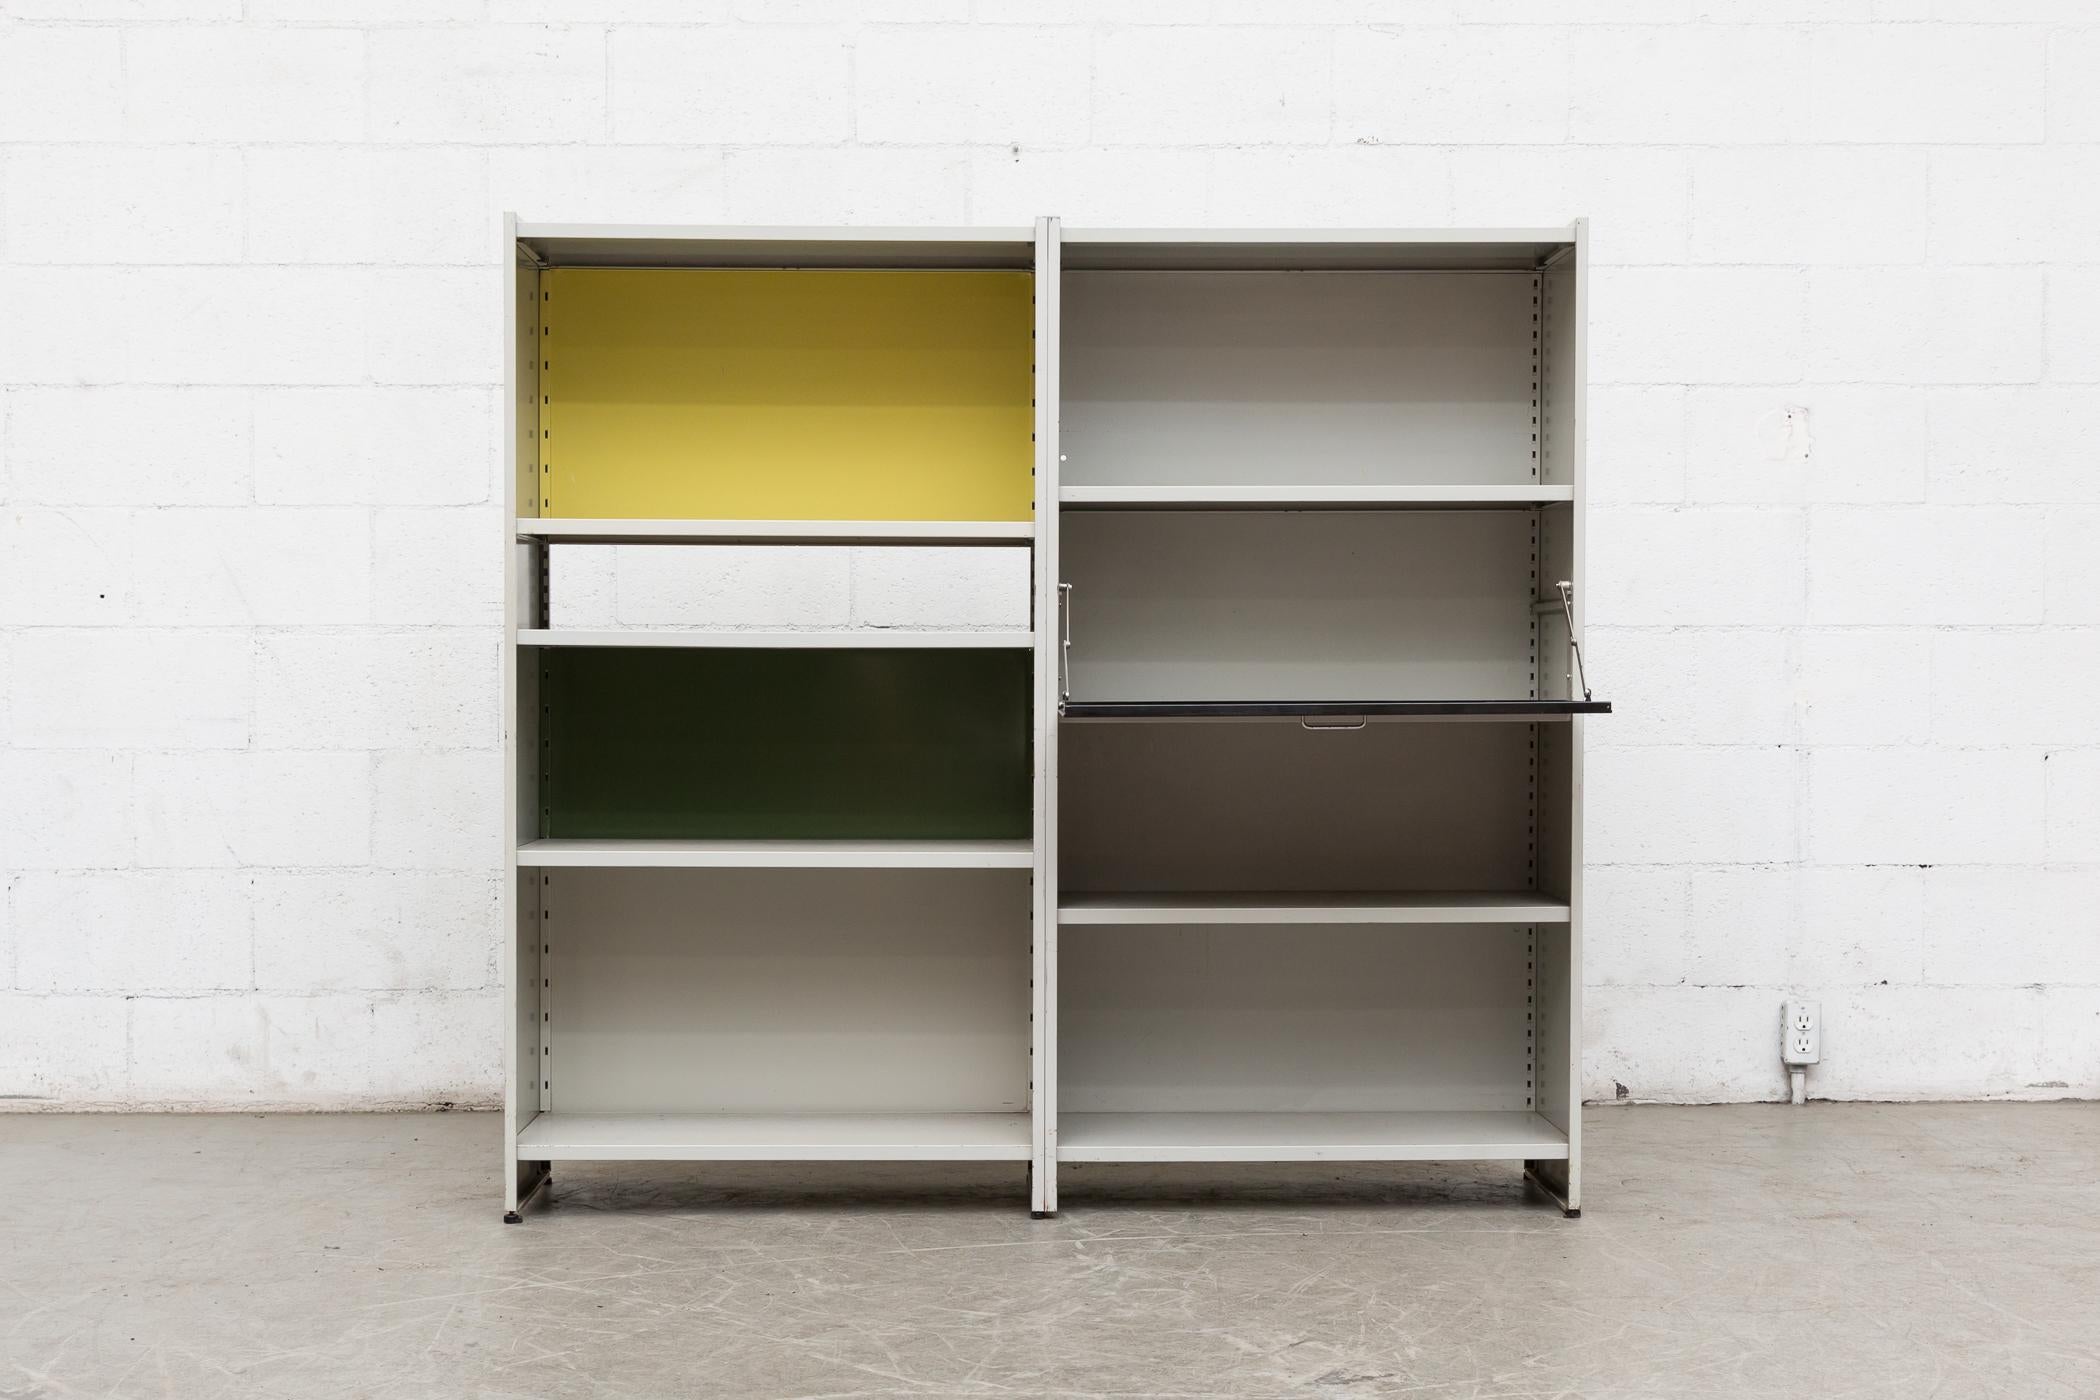 Amazing Gispen 5600 bookshelf by A.R. Cordemeyer. Grey enameled metal two-section industrial bookshelf and storage unit with drop down desk, black, yellow and green enameled metal panels. Can be used as a room divider, beautiful Eames inspired 360